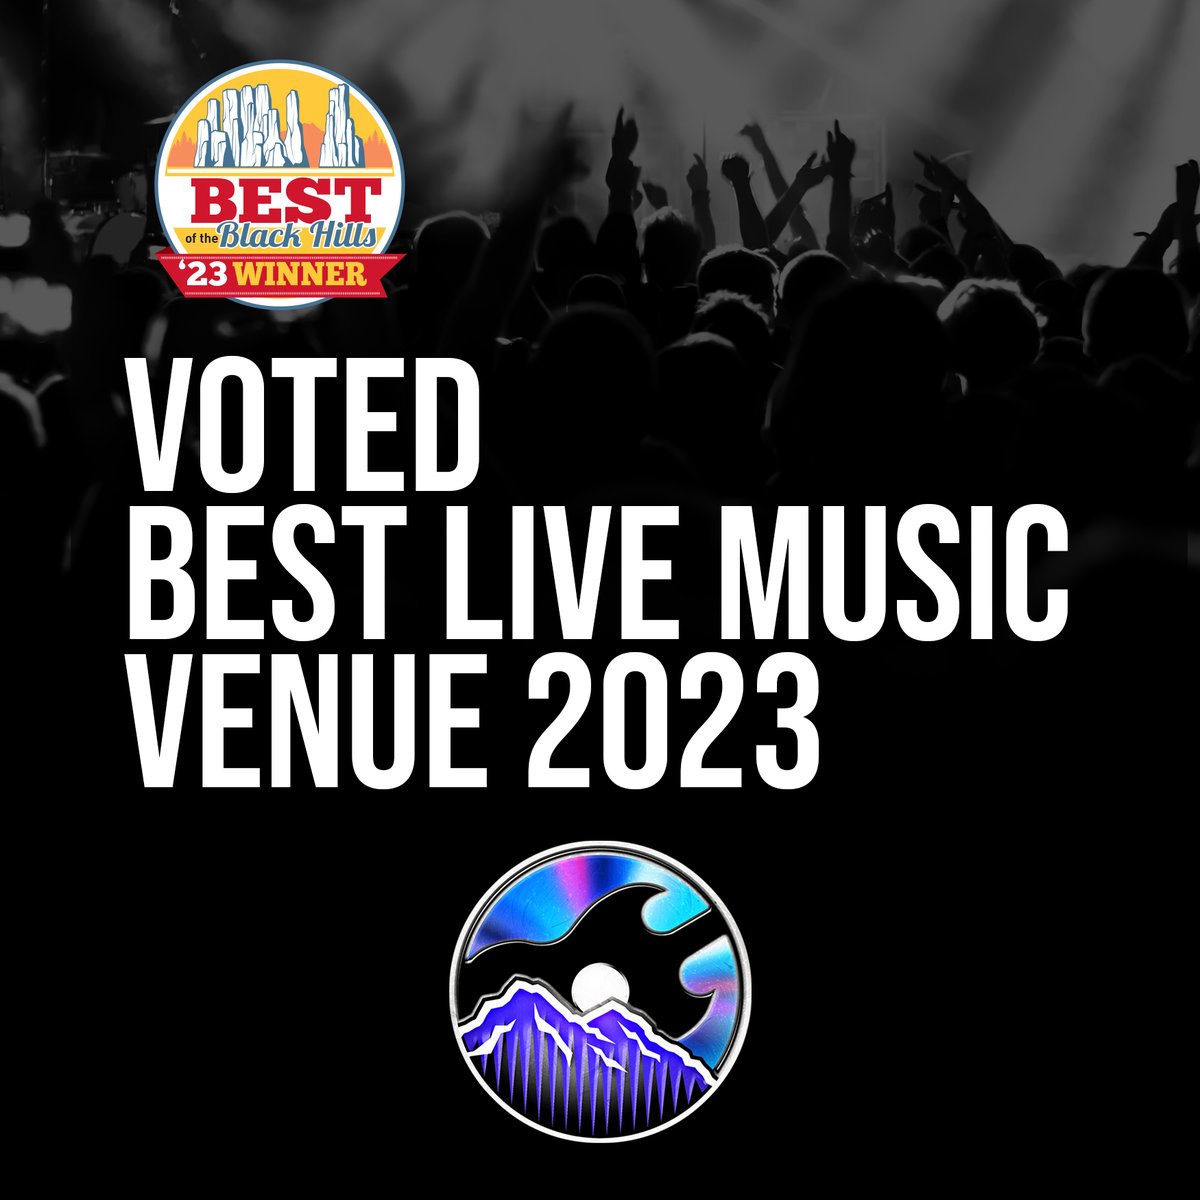 Deadwood Mountain Grand is thrilled to be voted Best Live Music Venue, Best Casino Hotel & Dale's Sportsbook voted Best Sports Betting Casino by the Rapid City Journal's Best of the Black Hills Contest! #deadwoodsd #historicdeadwood #dmgrand #casinohotel #sportsbook #livemusic